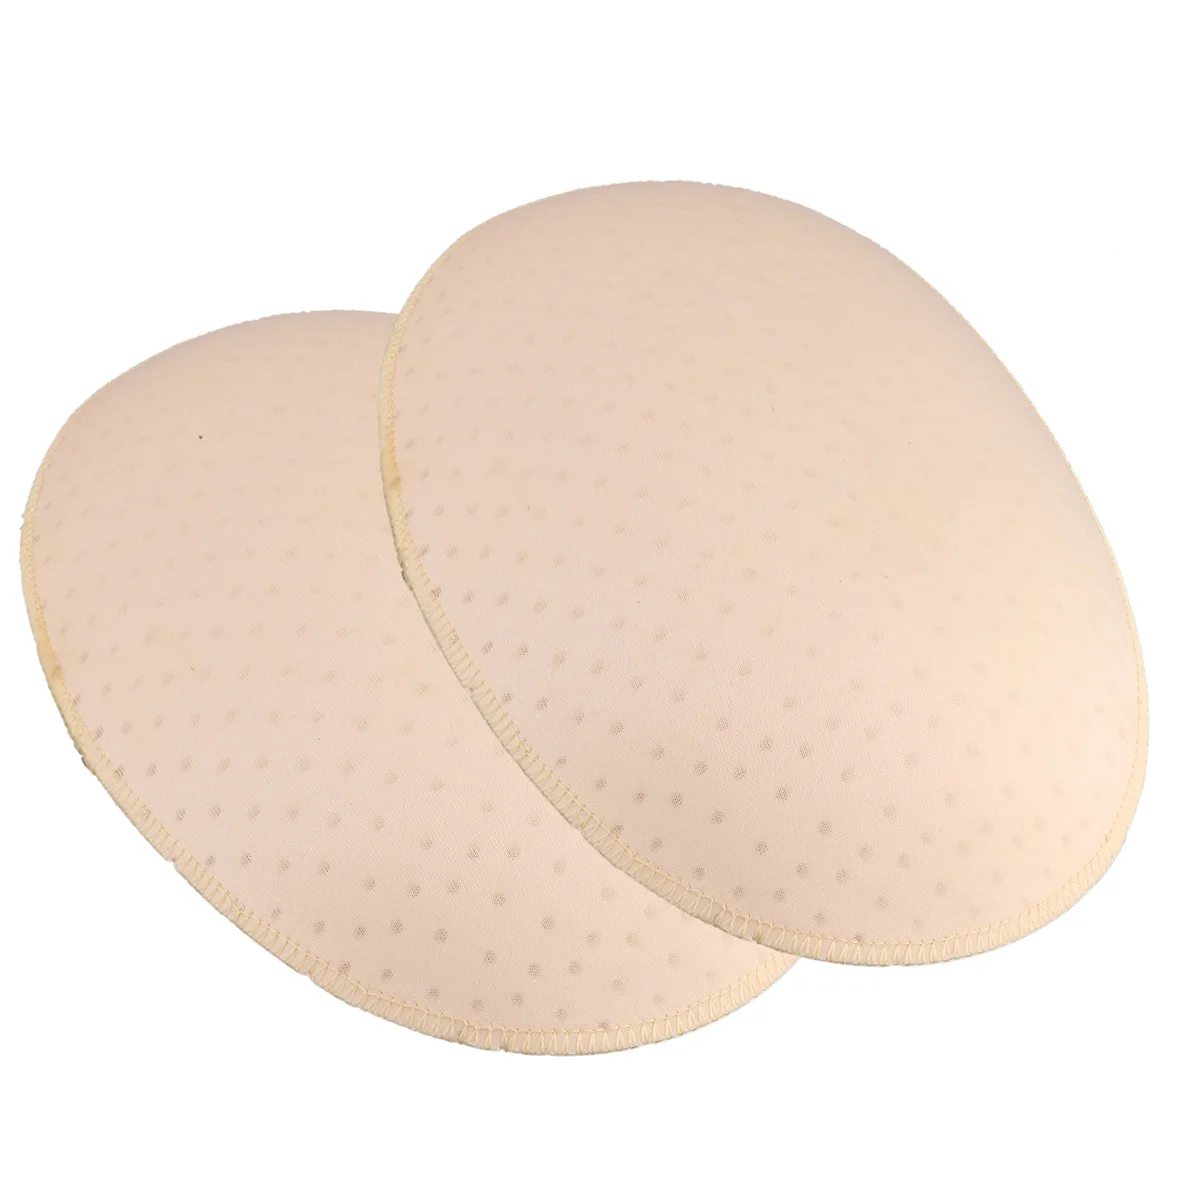 Self-adhesive Sponge Hip Pads Reusable Breathable Pads Specialty Beautify  Hip Buttock Lifter Shaper Hip Butt Enhancer Pads - AliExpress